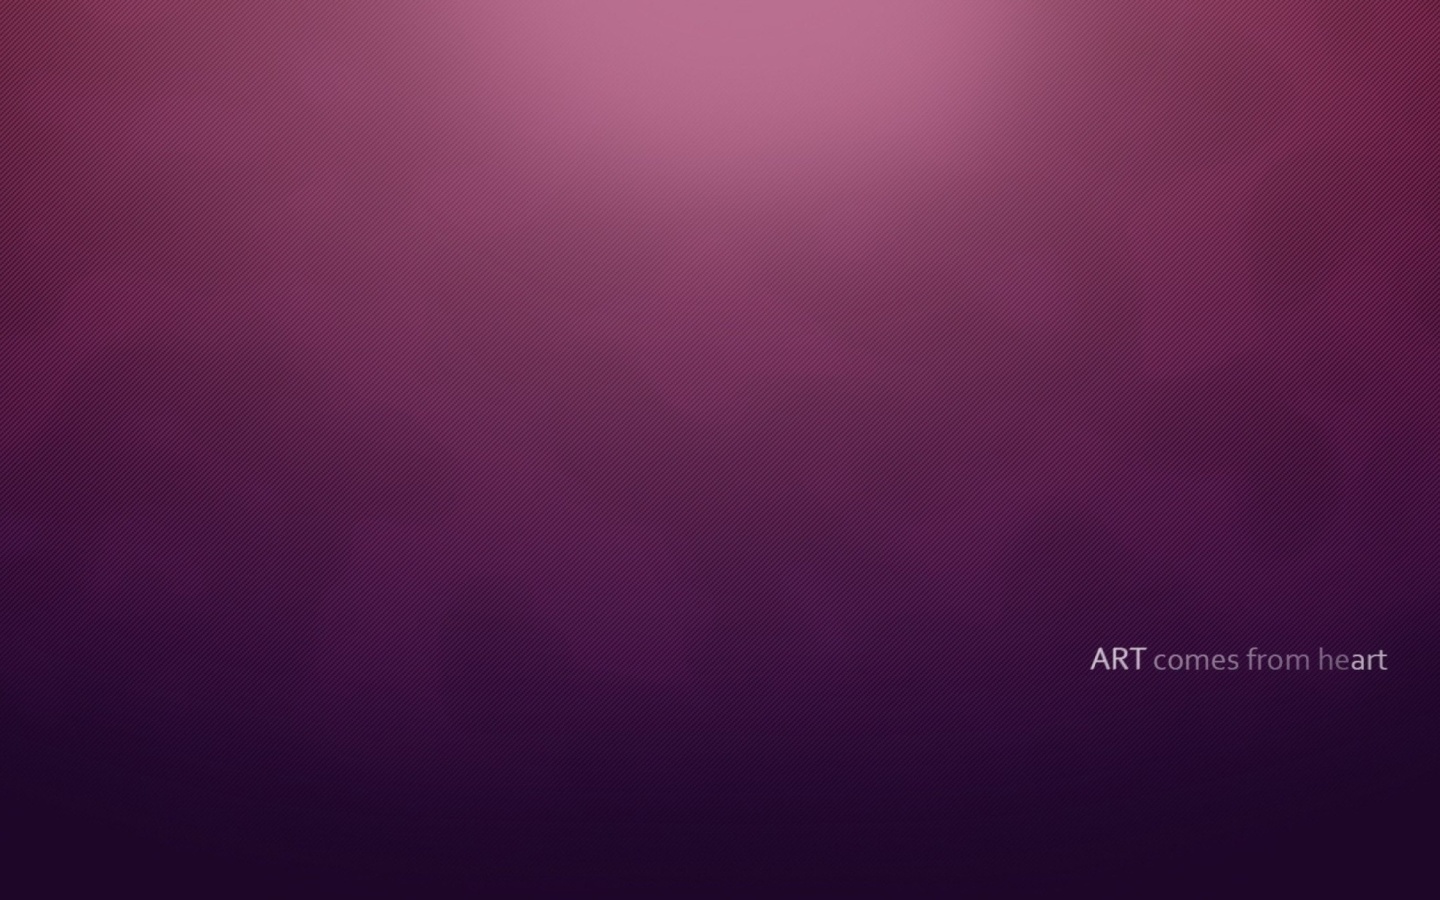 Simple Texture, Art comes from Heart wallpaper 1440x900